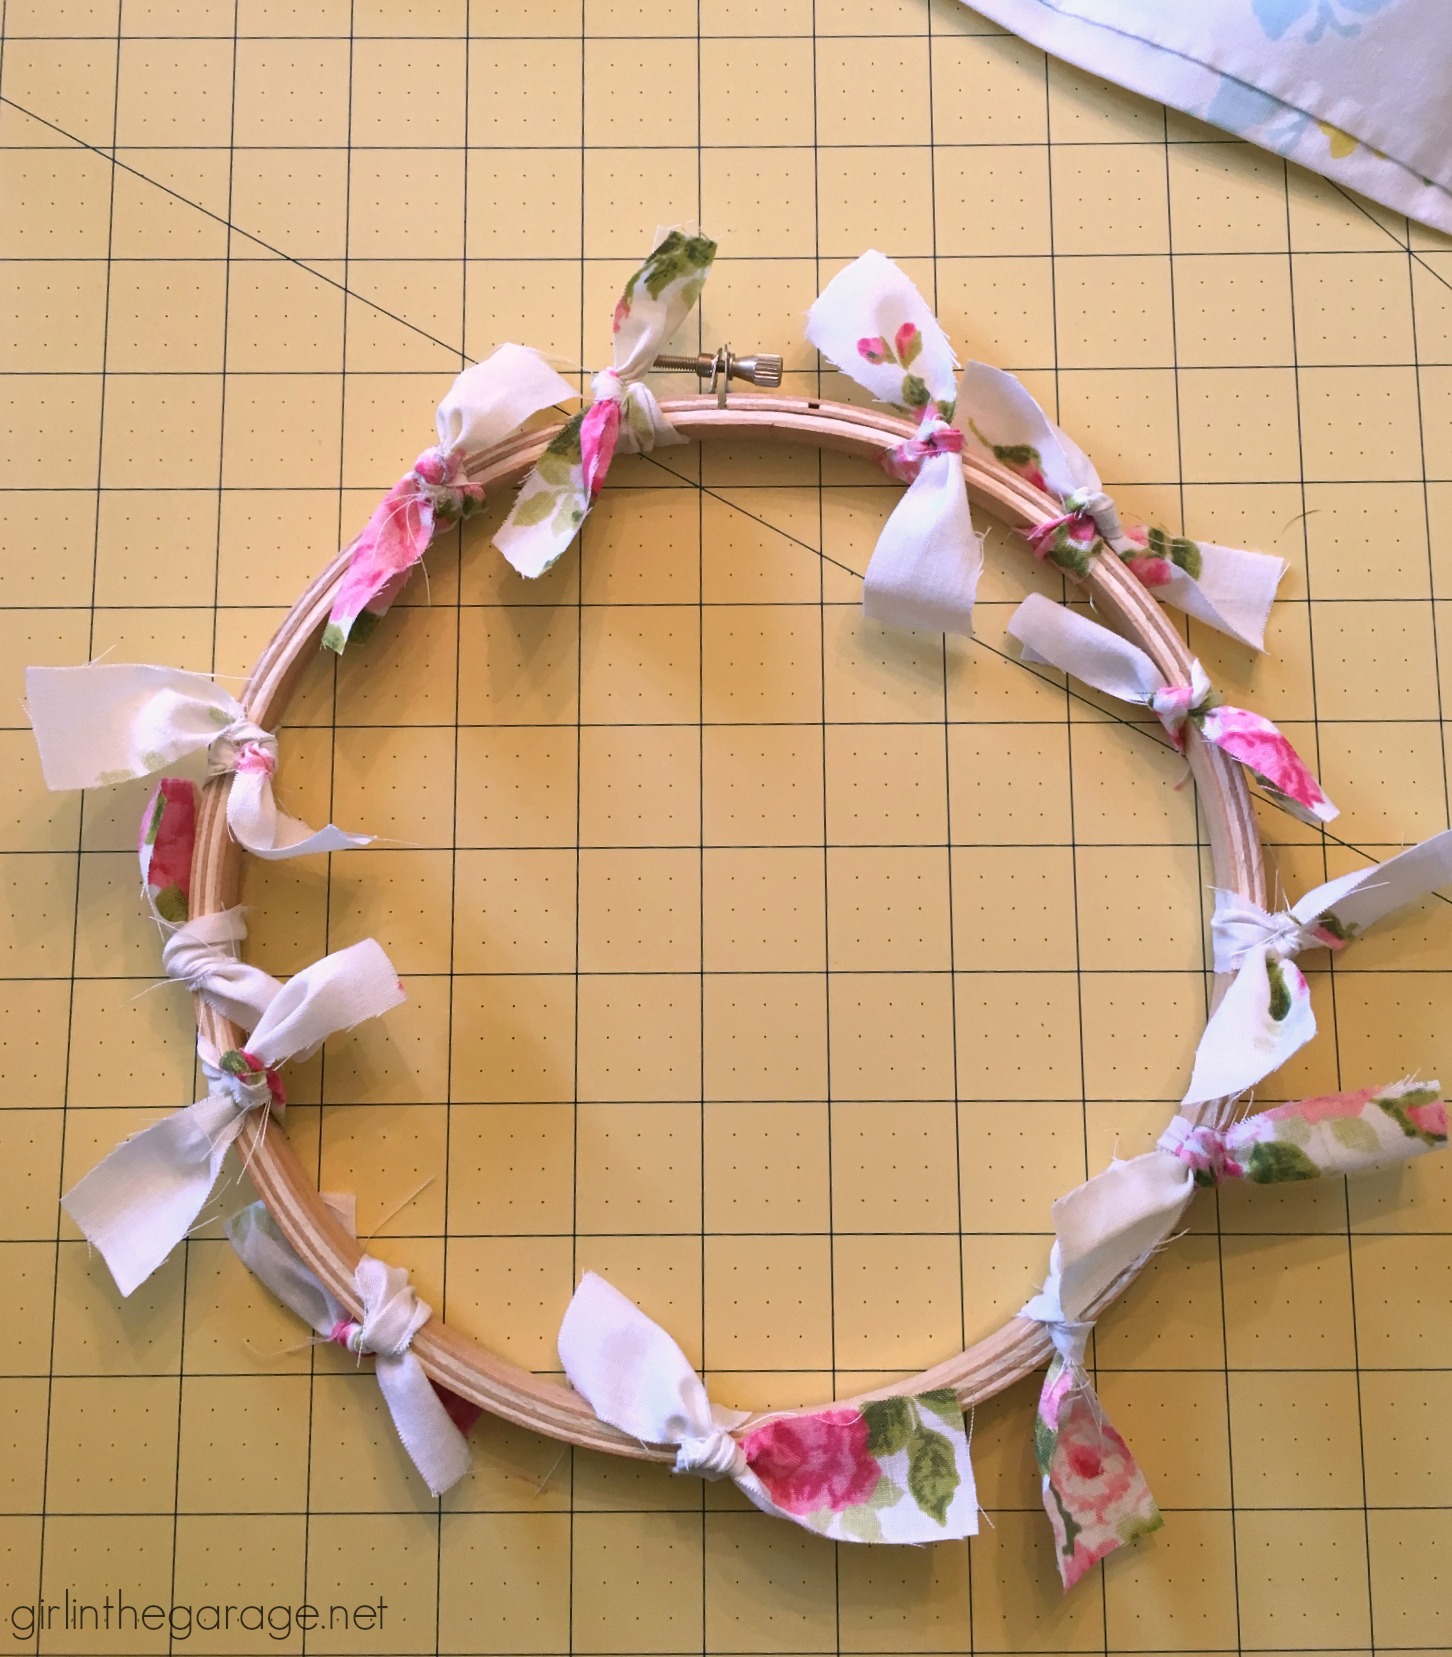 Make an easy DIY rag wreath for spring with vintage fabric - Step-by-step tutorial by Girl in the Garage